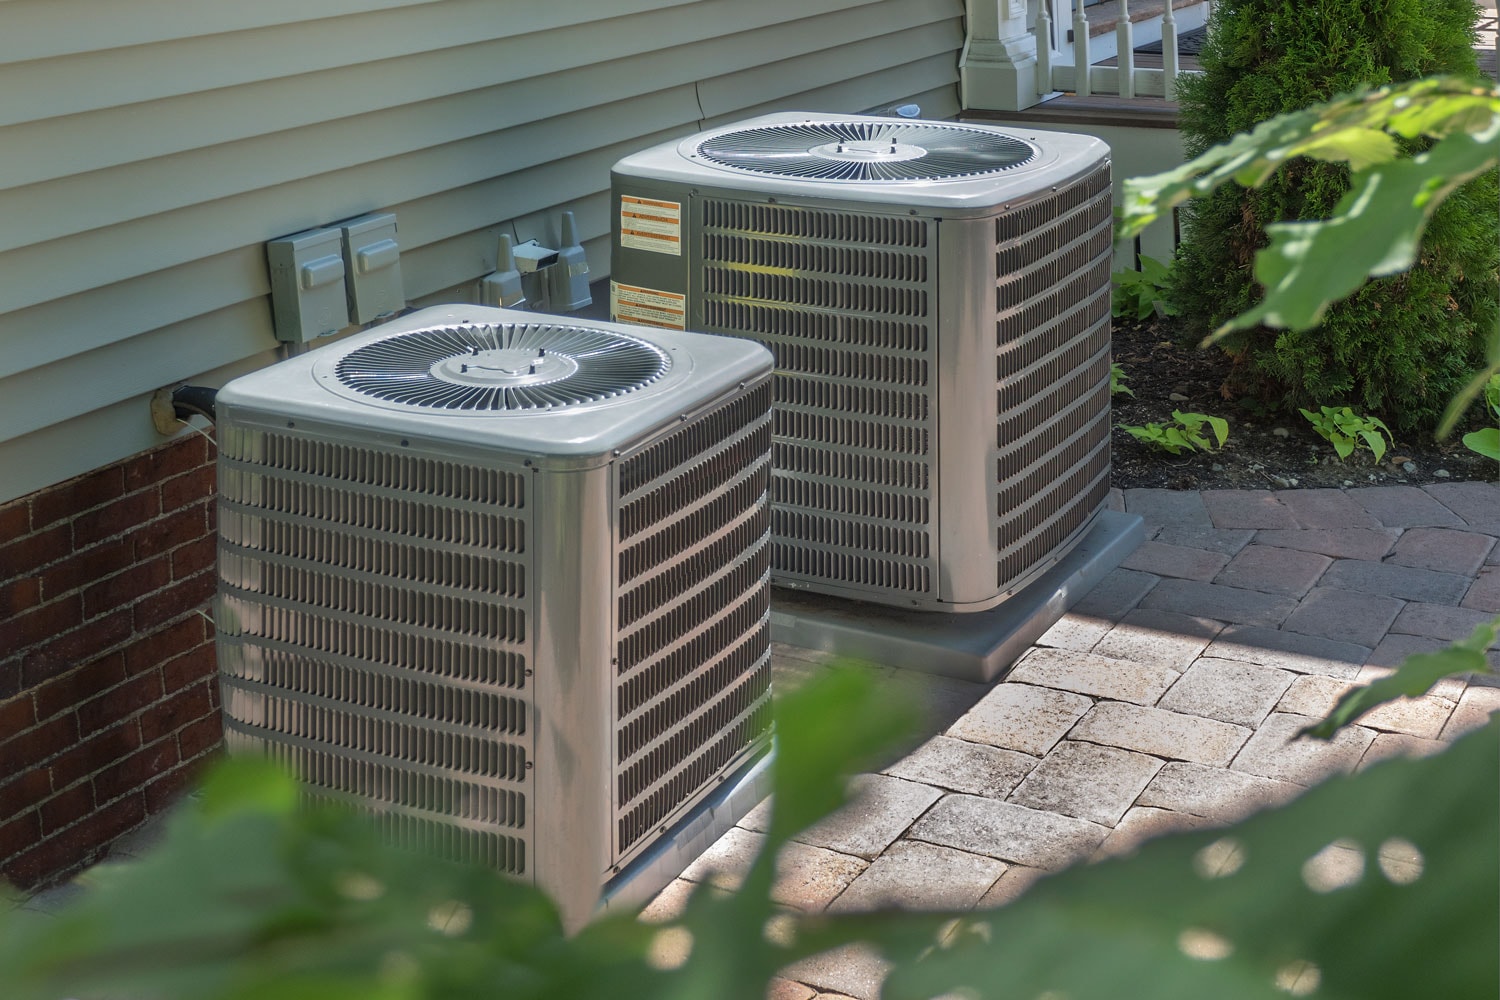 Two air conditioning units mounted on concrete stands